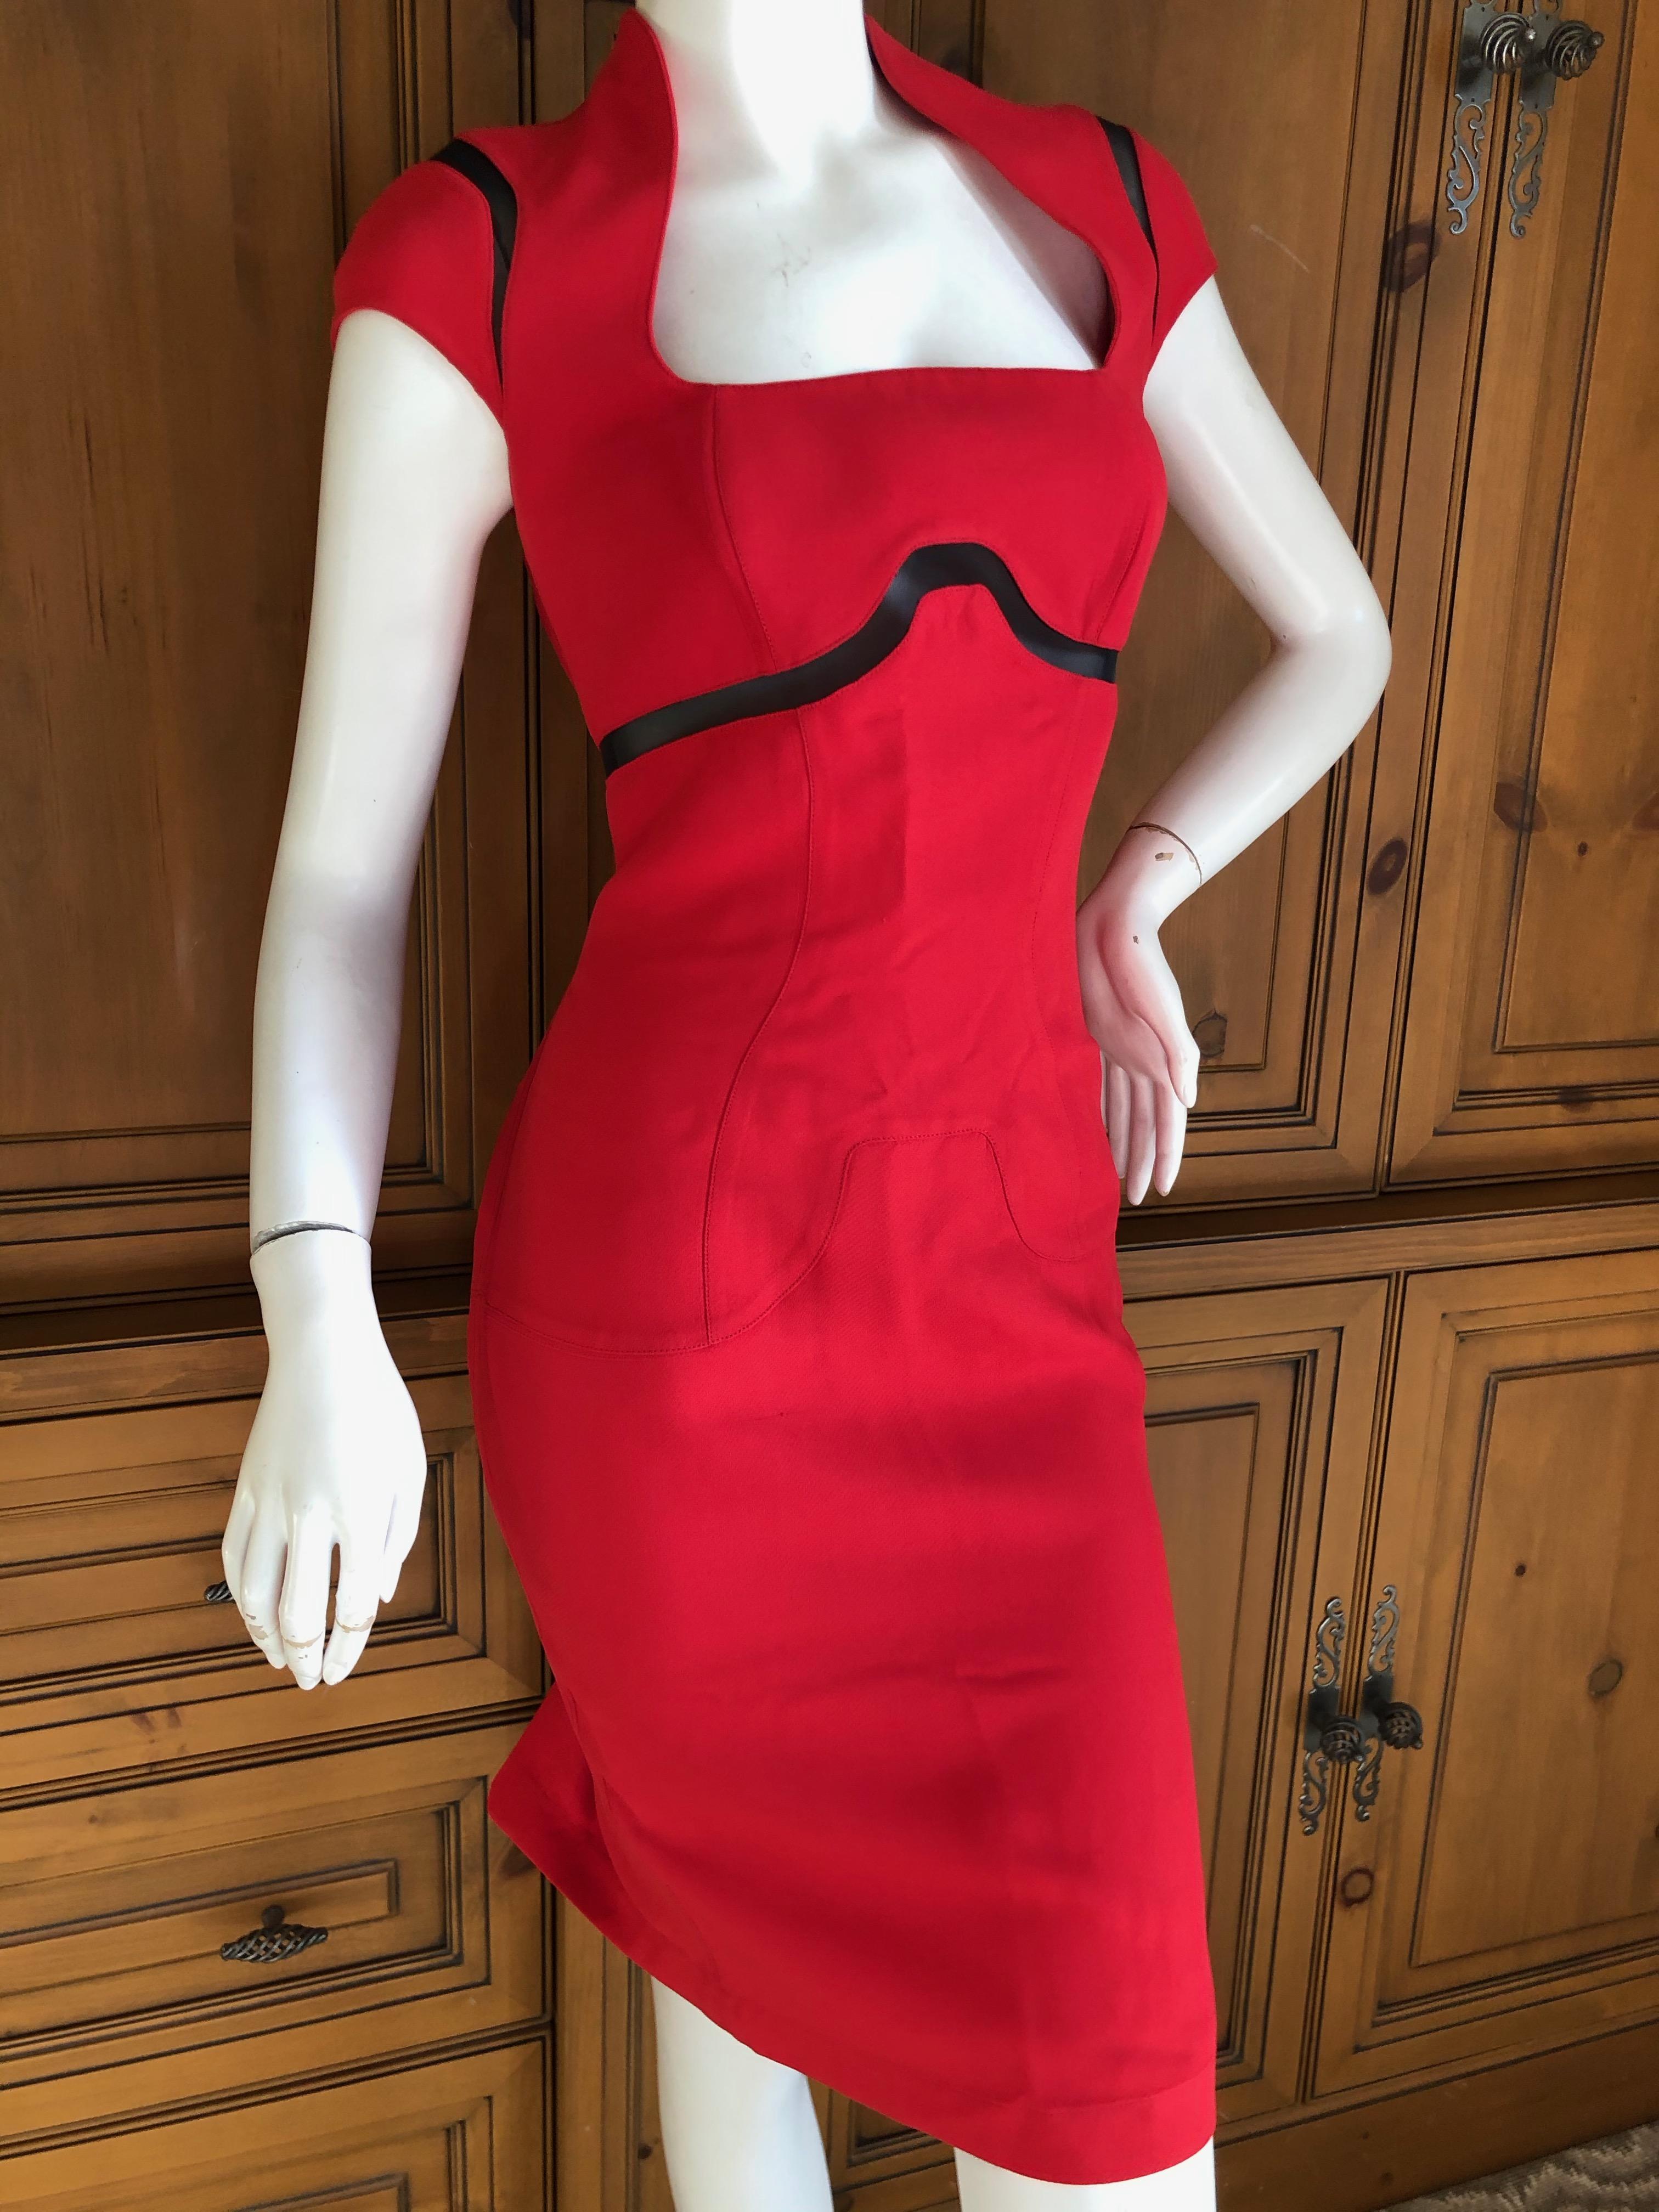 Women's Thierry Mugler Vintage 1980's Red Cocktail Dress with Sheer Inserts For Sale